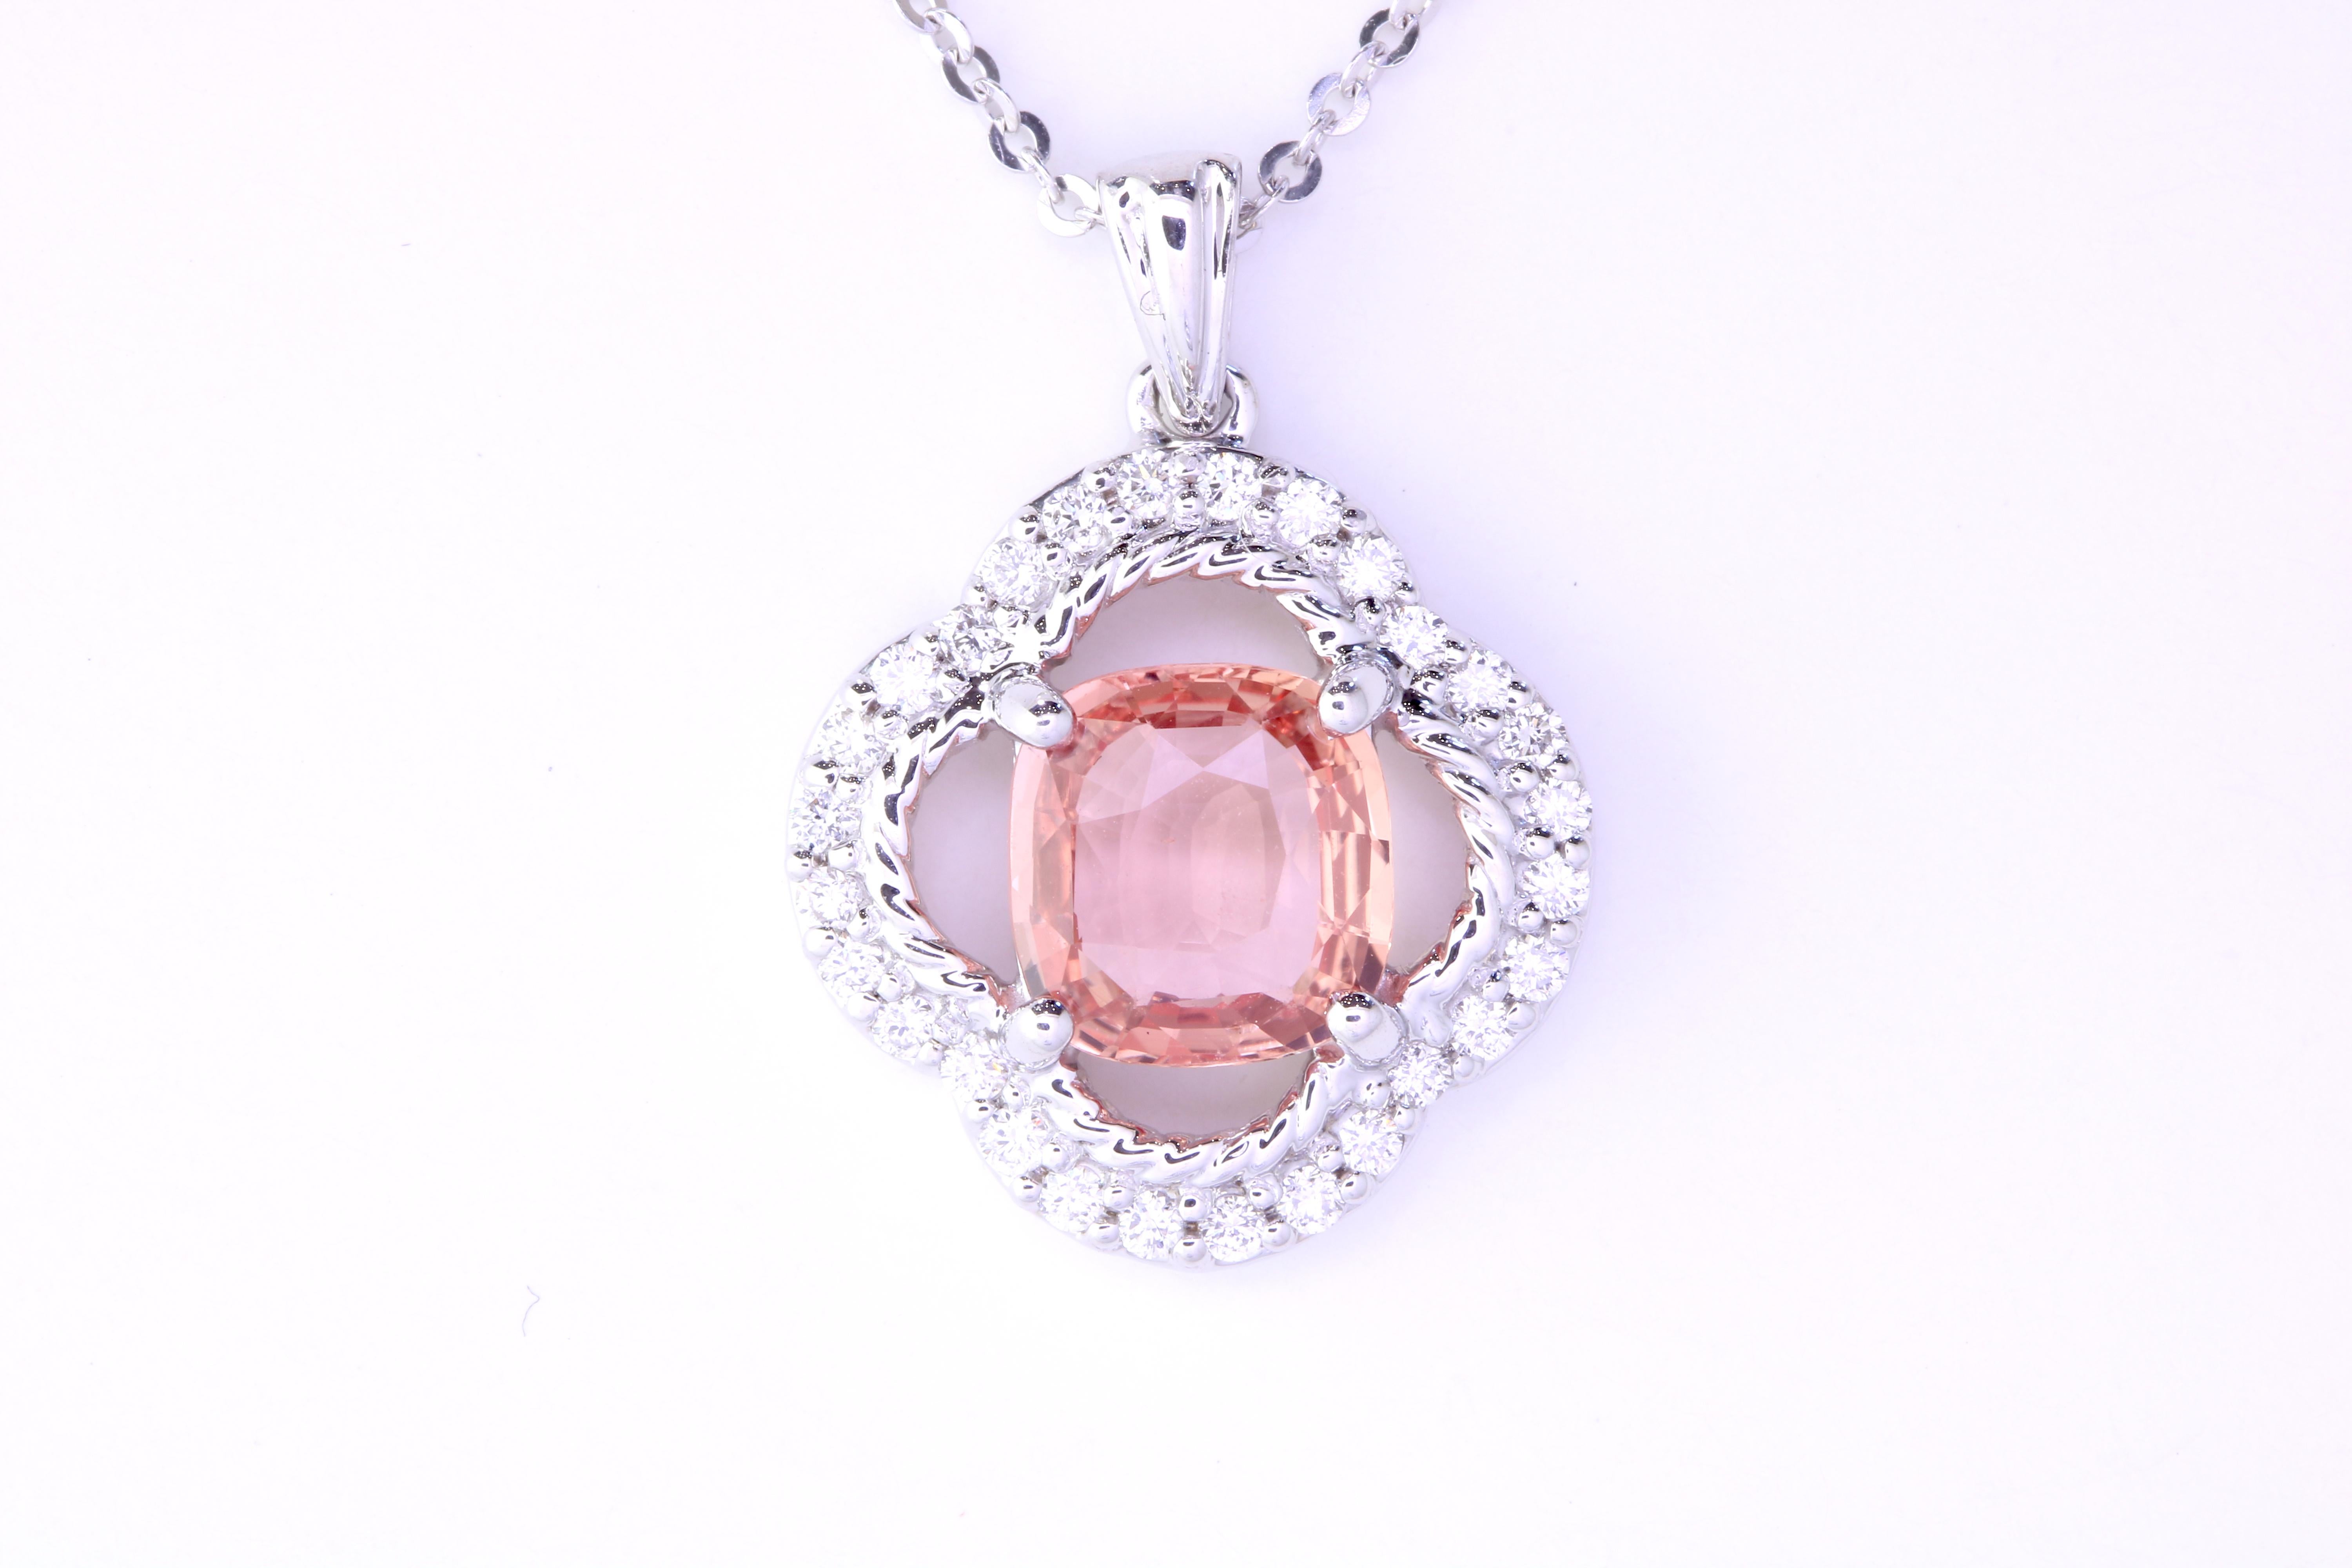 An illuminating 1.55 carat Padparadscha Sapphire is the star of this piece. Set in 14k White Gold and surrounded with 28 brilliant round diamonds totaling 0.24 carat, you will be the center of attention!

Material: 14k White Gold 
Center Stone